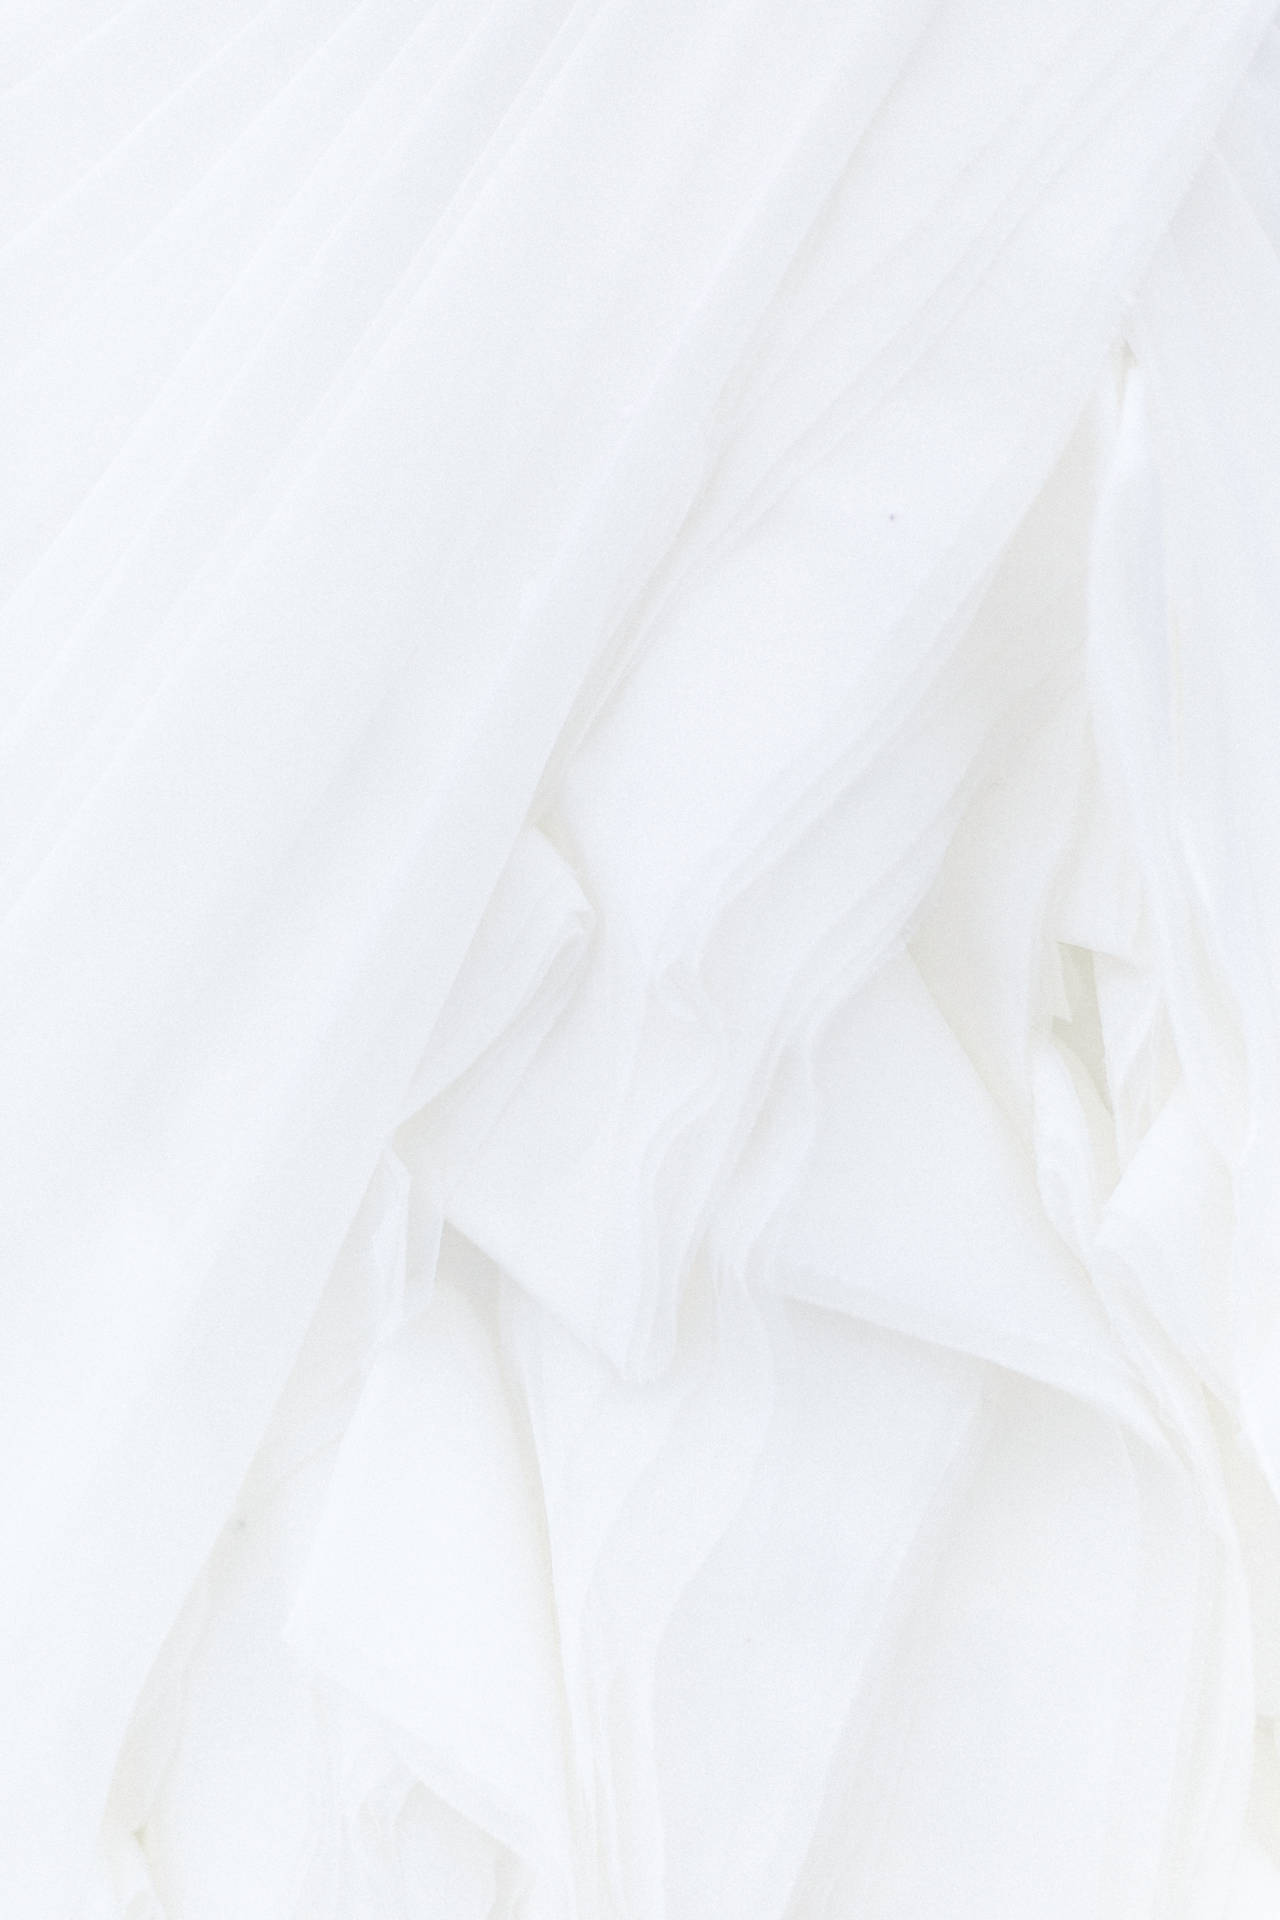 Pure White Wallpapers  Wallpaper Cave